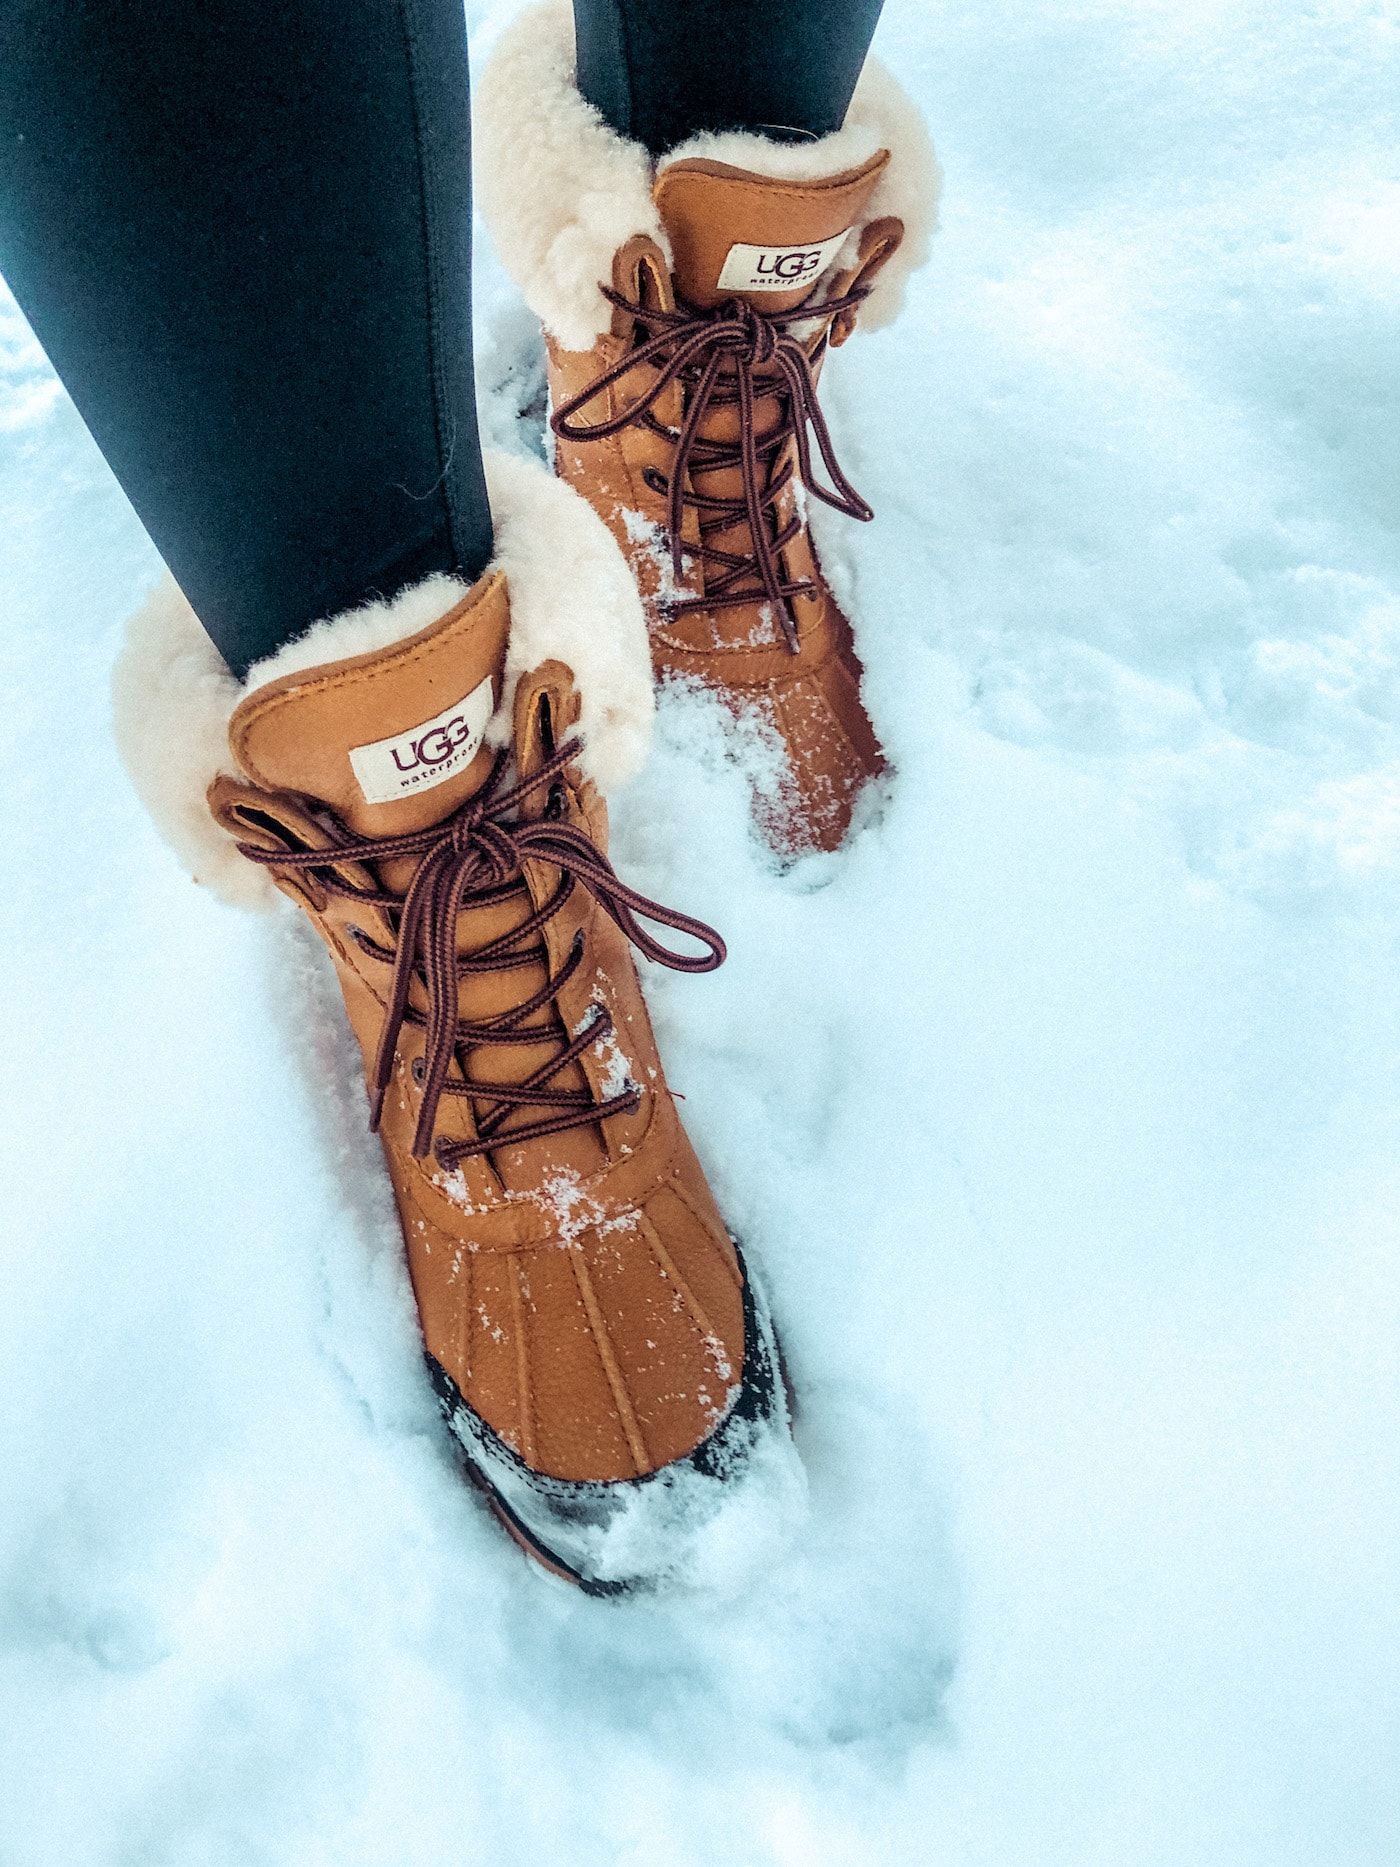 The Best Snow Boots for Winter - UGG adirondack iii boot